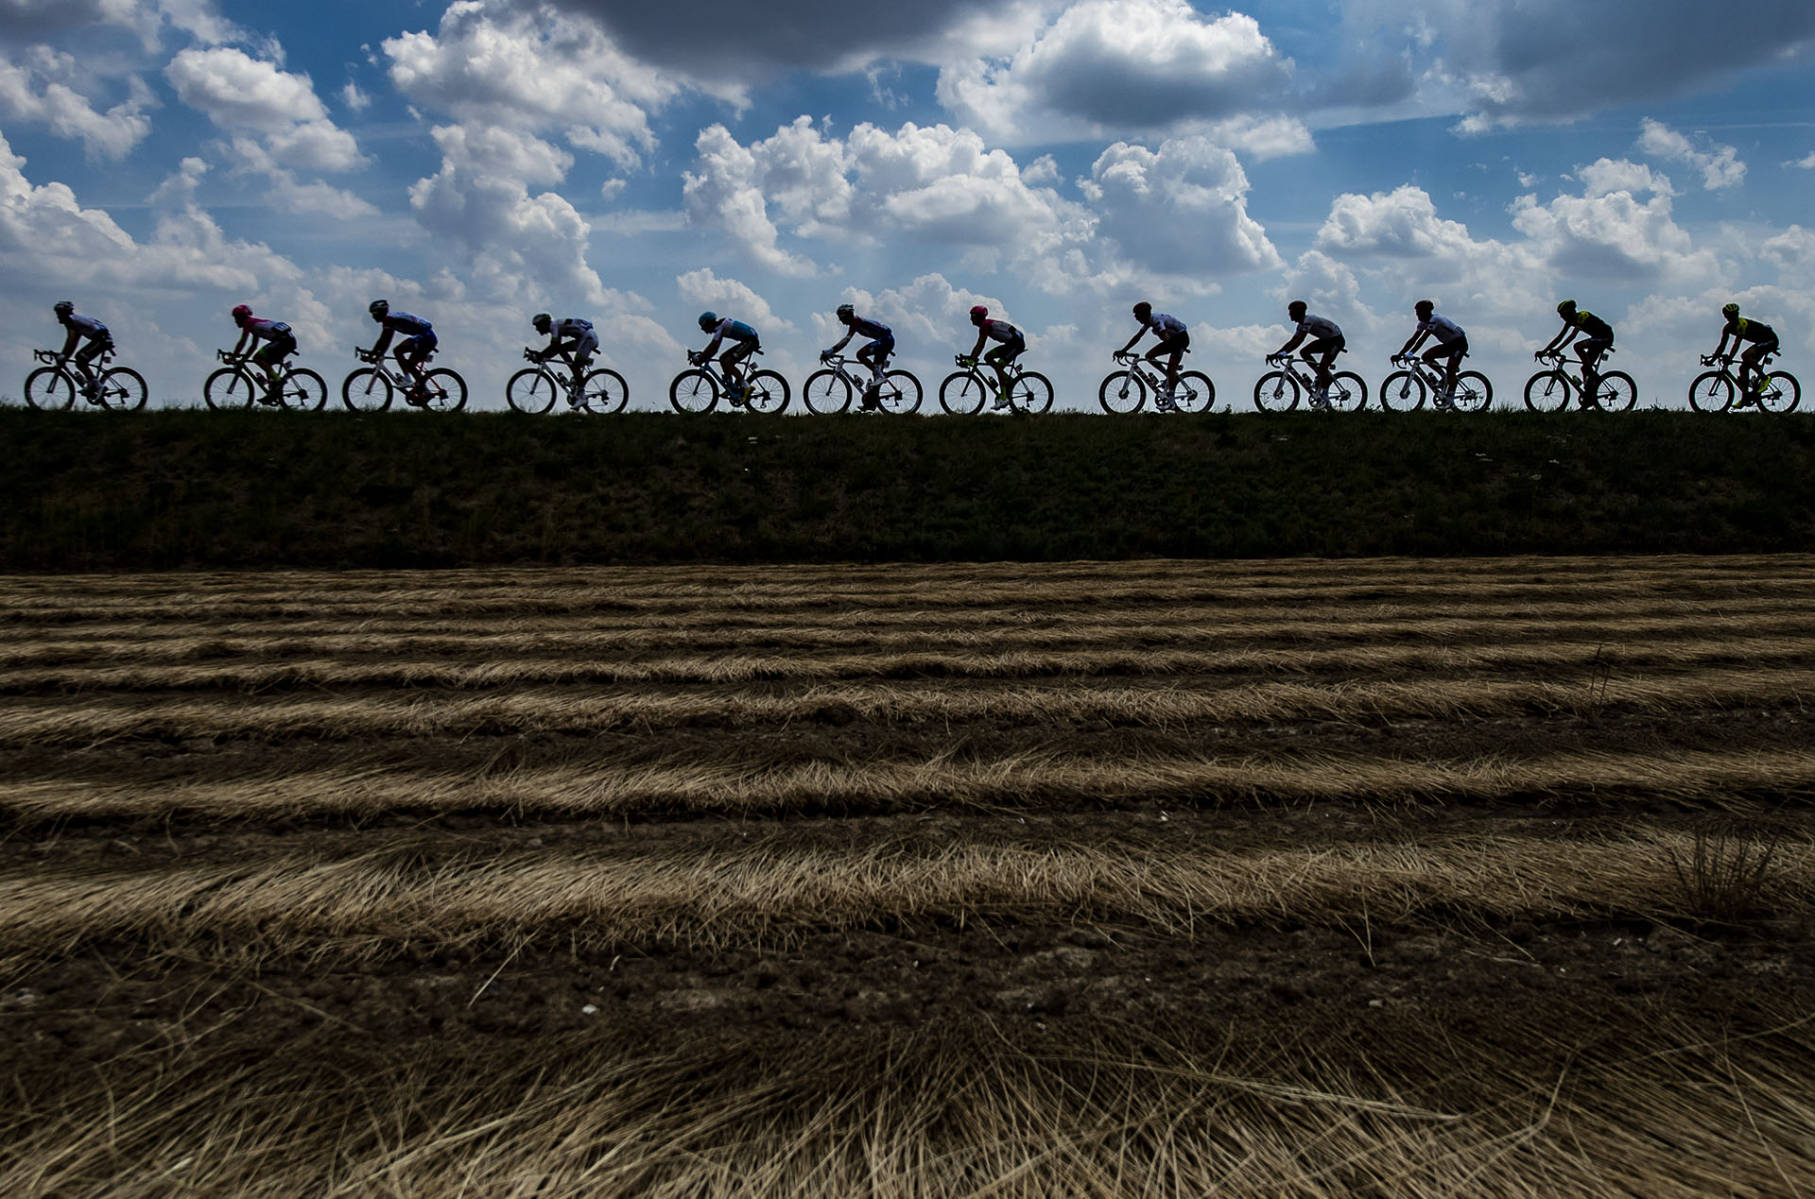 Tour de France 2018 - Stage Eight - The peloton rides during the stage